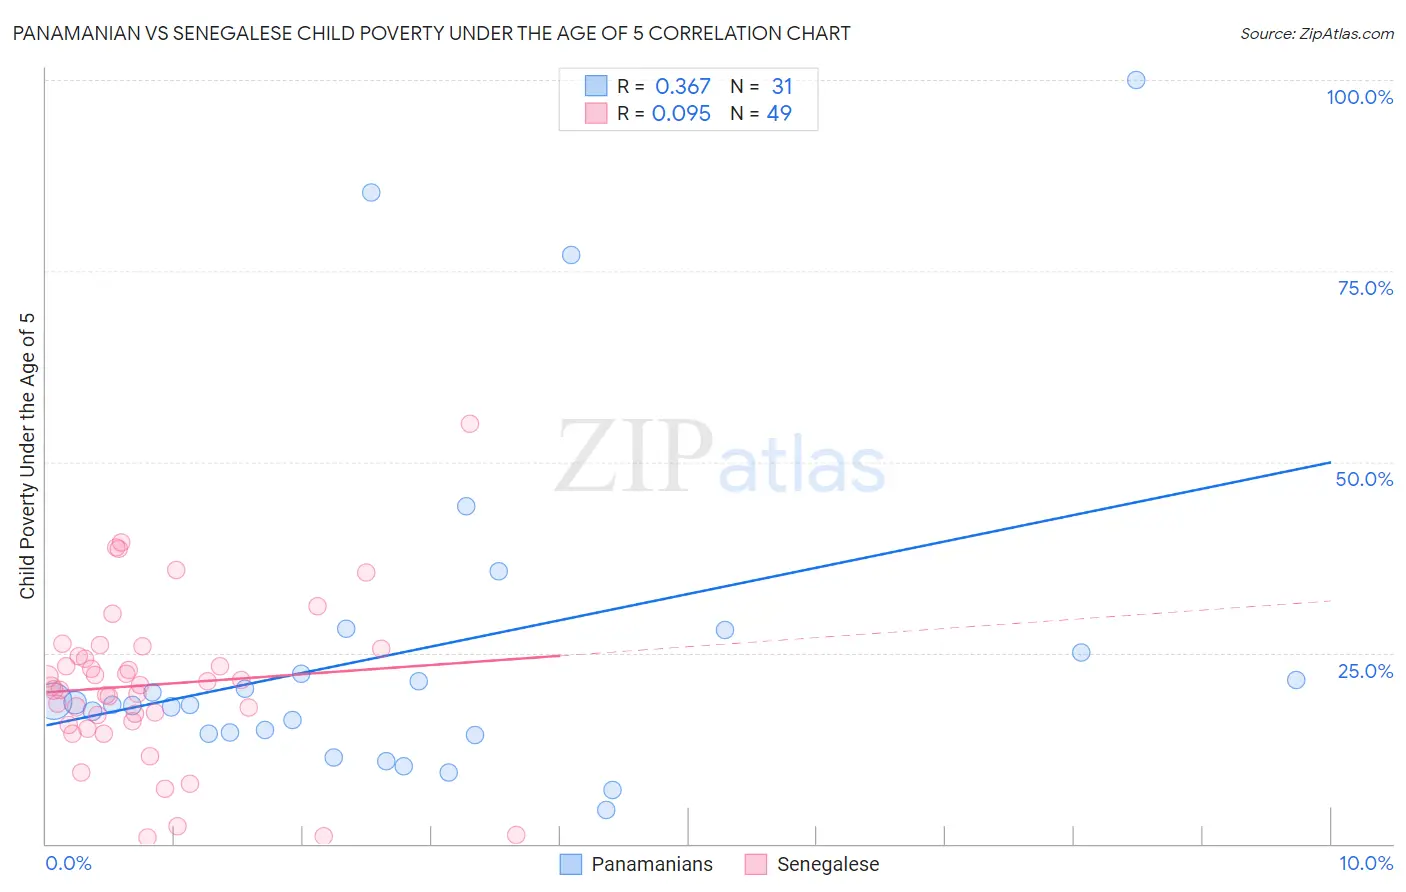 Panamanian vs Senegalese Child Poverty Under the Age of 5